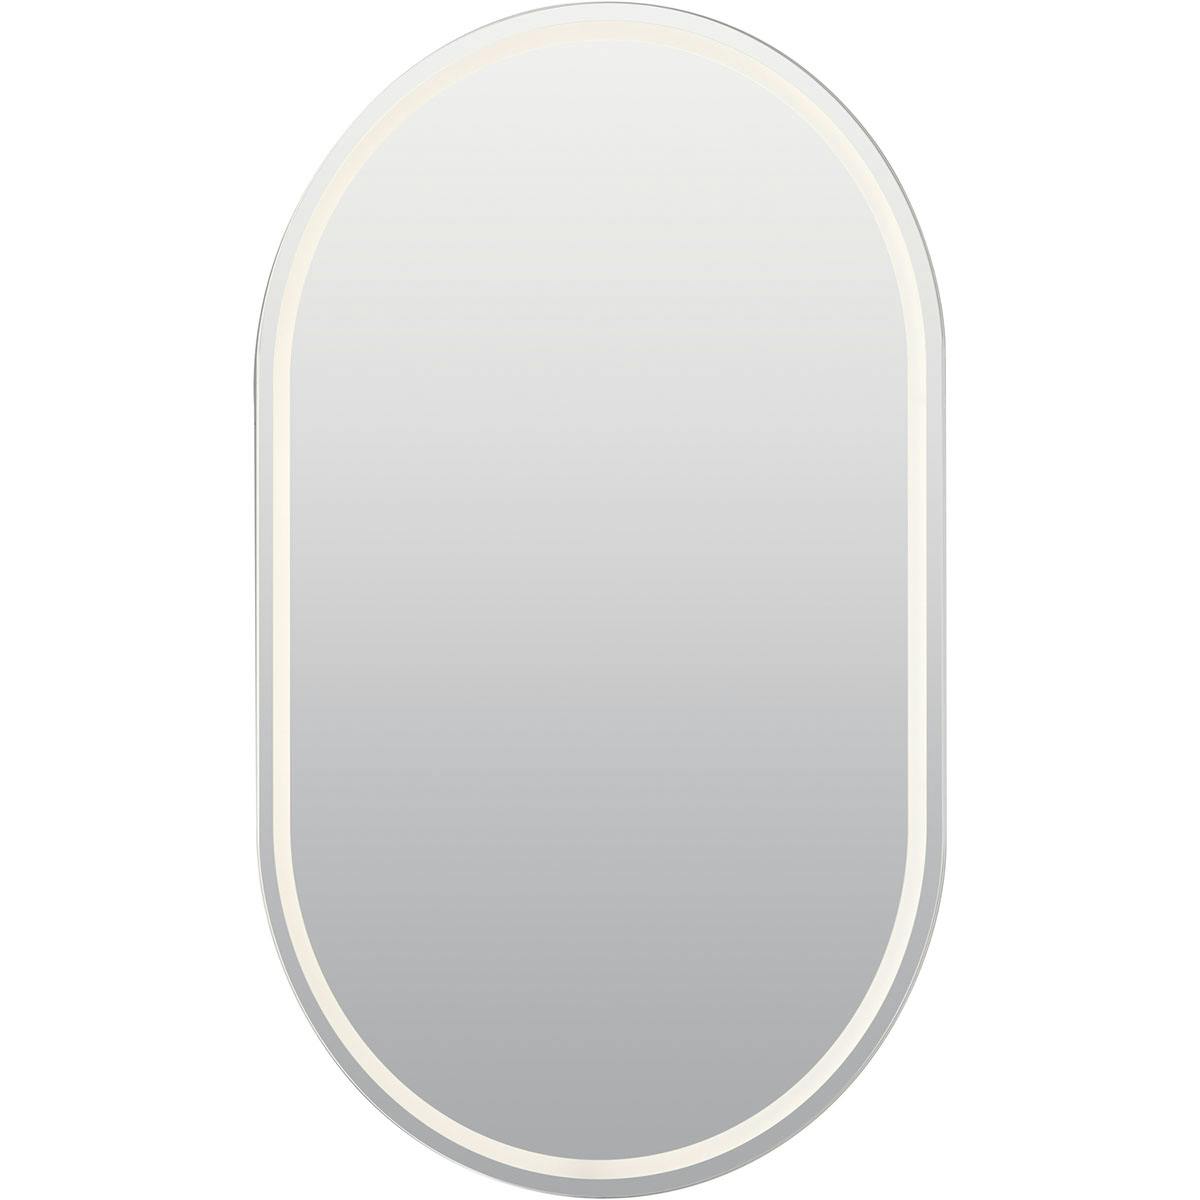 Front view of the Menillo 38.5" LED Vanity Mirror on a white background